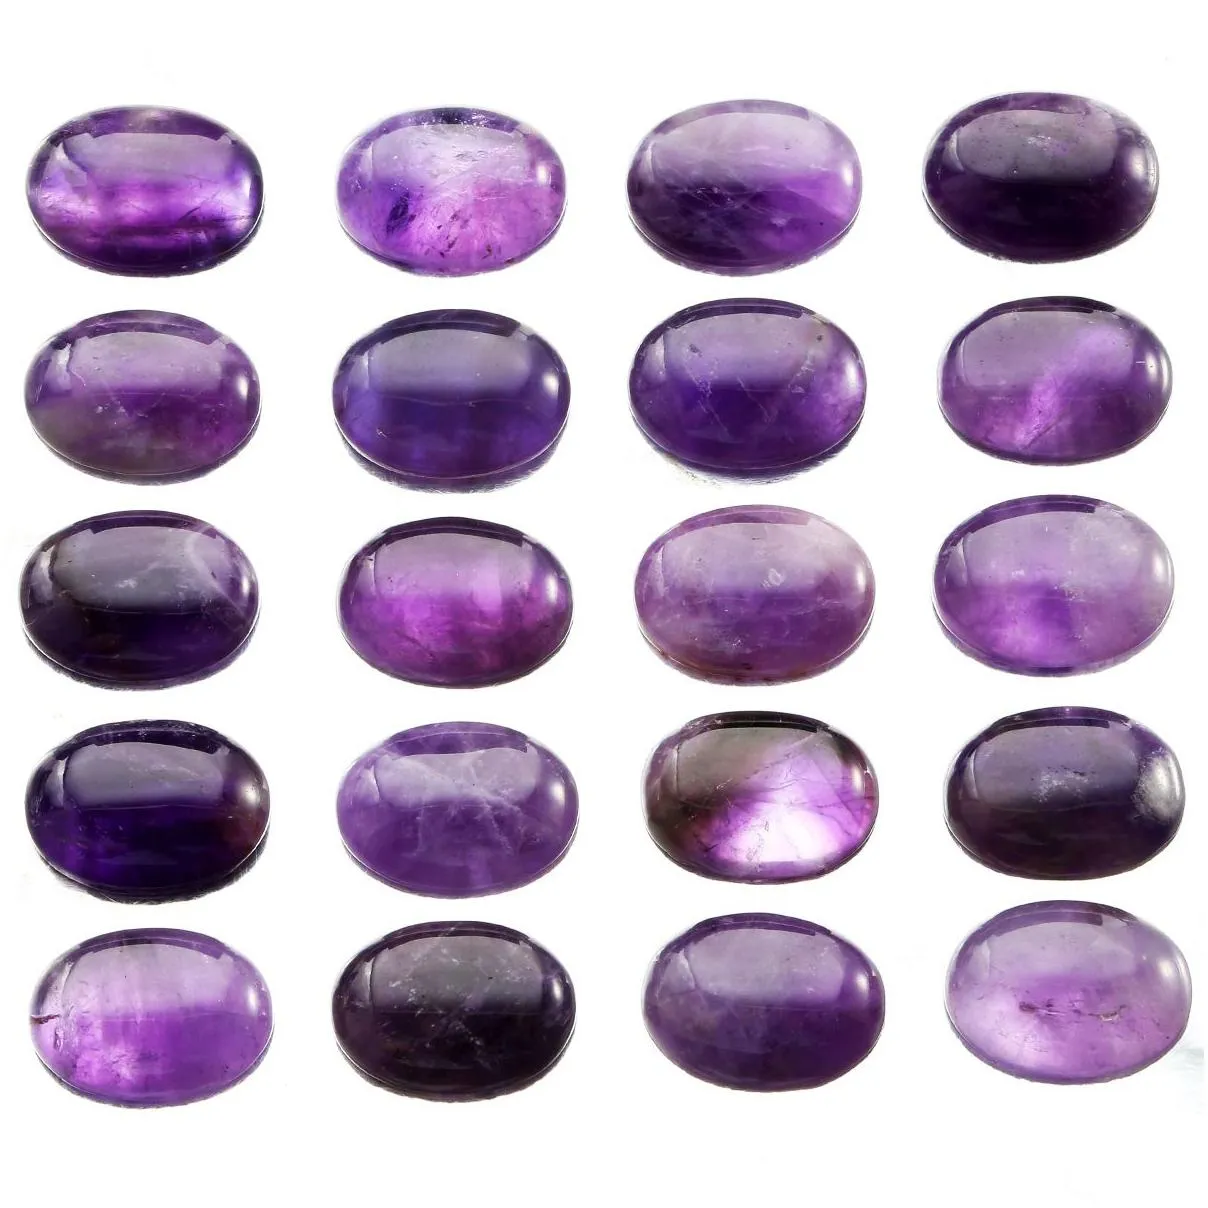 Natural Amethyst Oval Flat Back Gemstone Cabochons Healing Chakra Crystal Stone Bead Cab Covers No Hole for Jewelry Craft Making